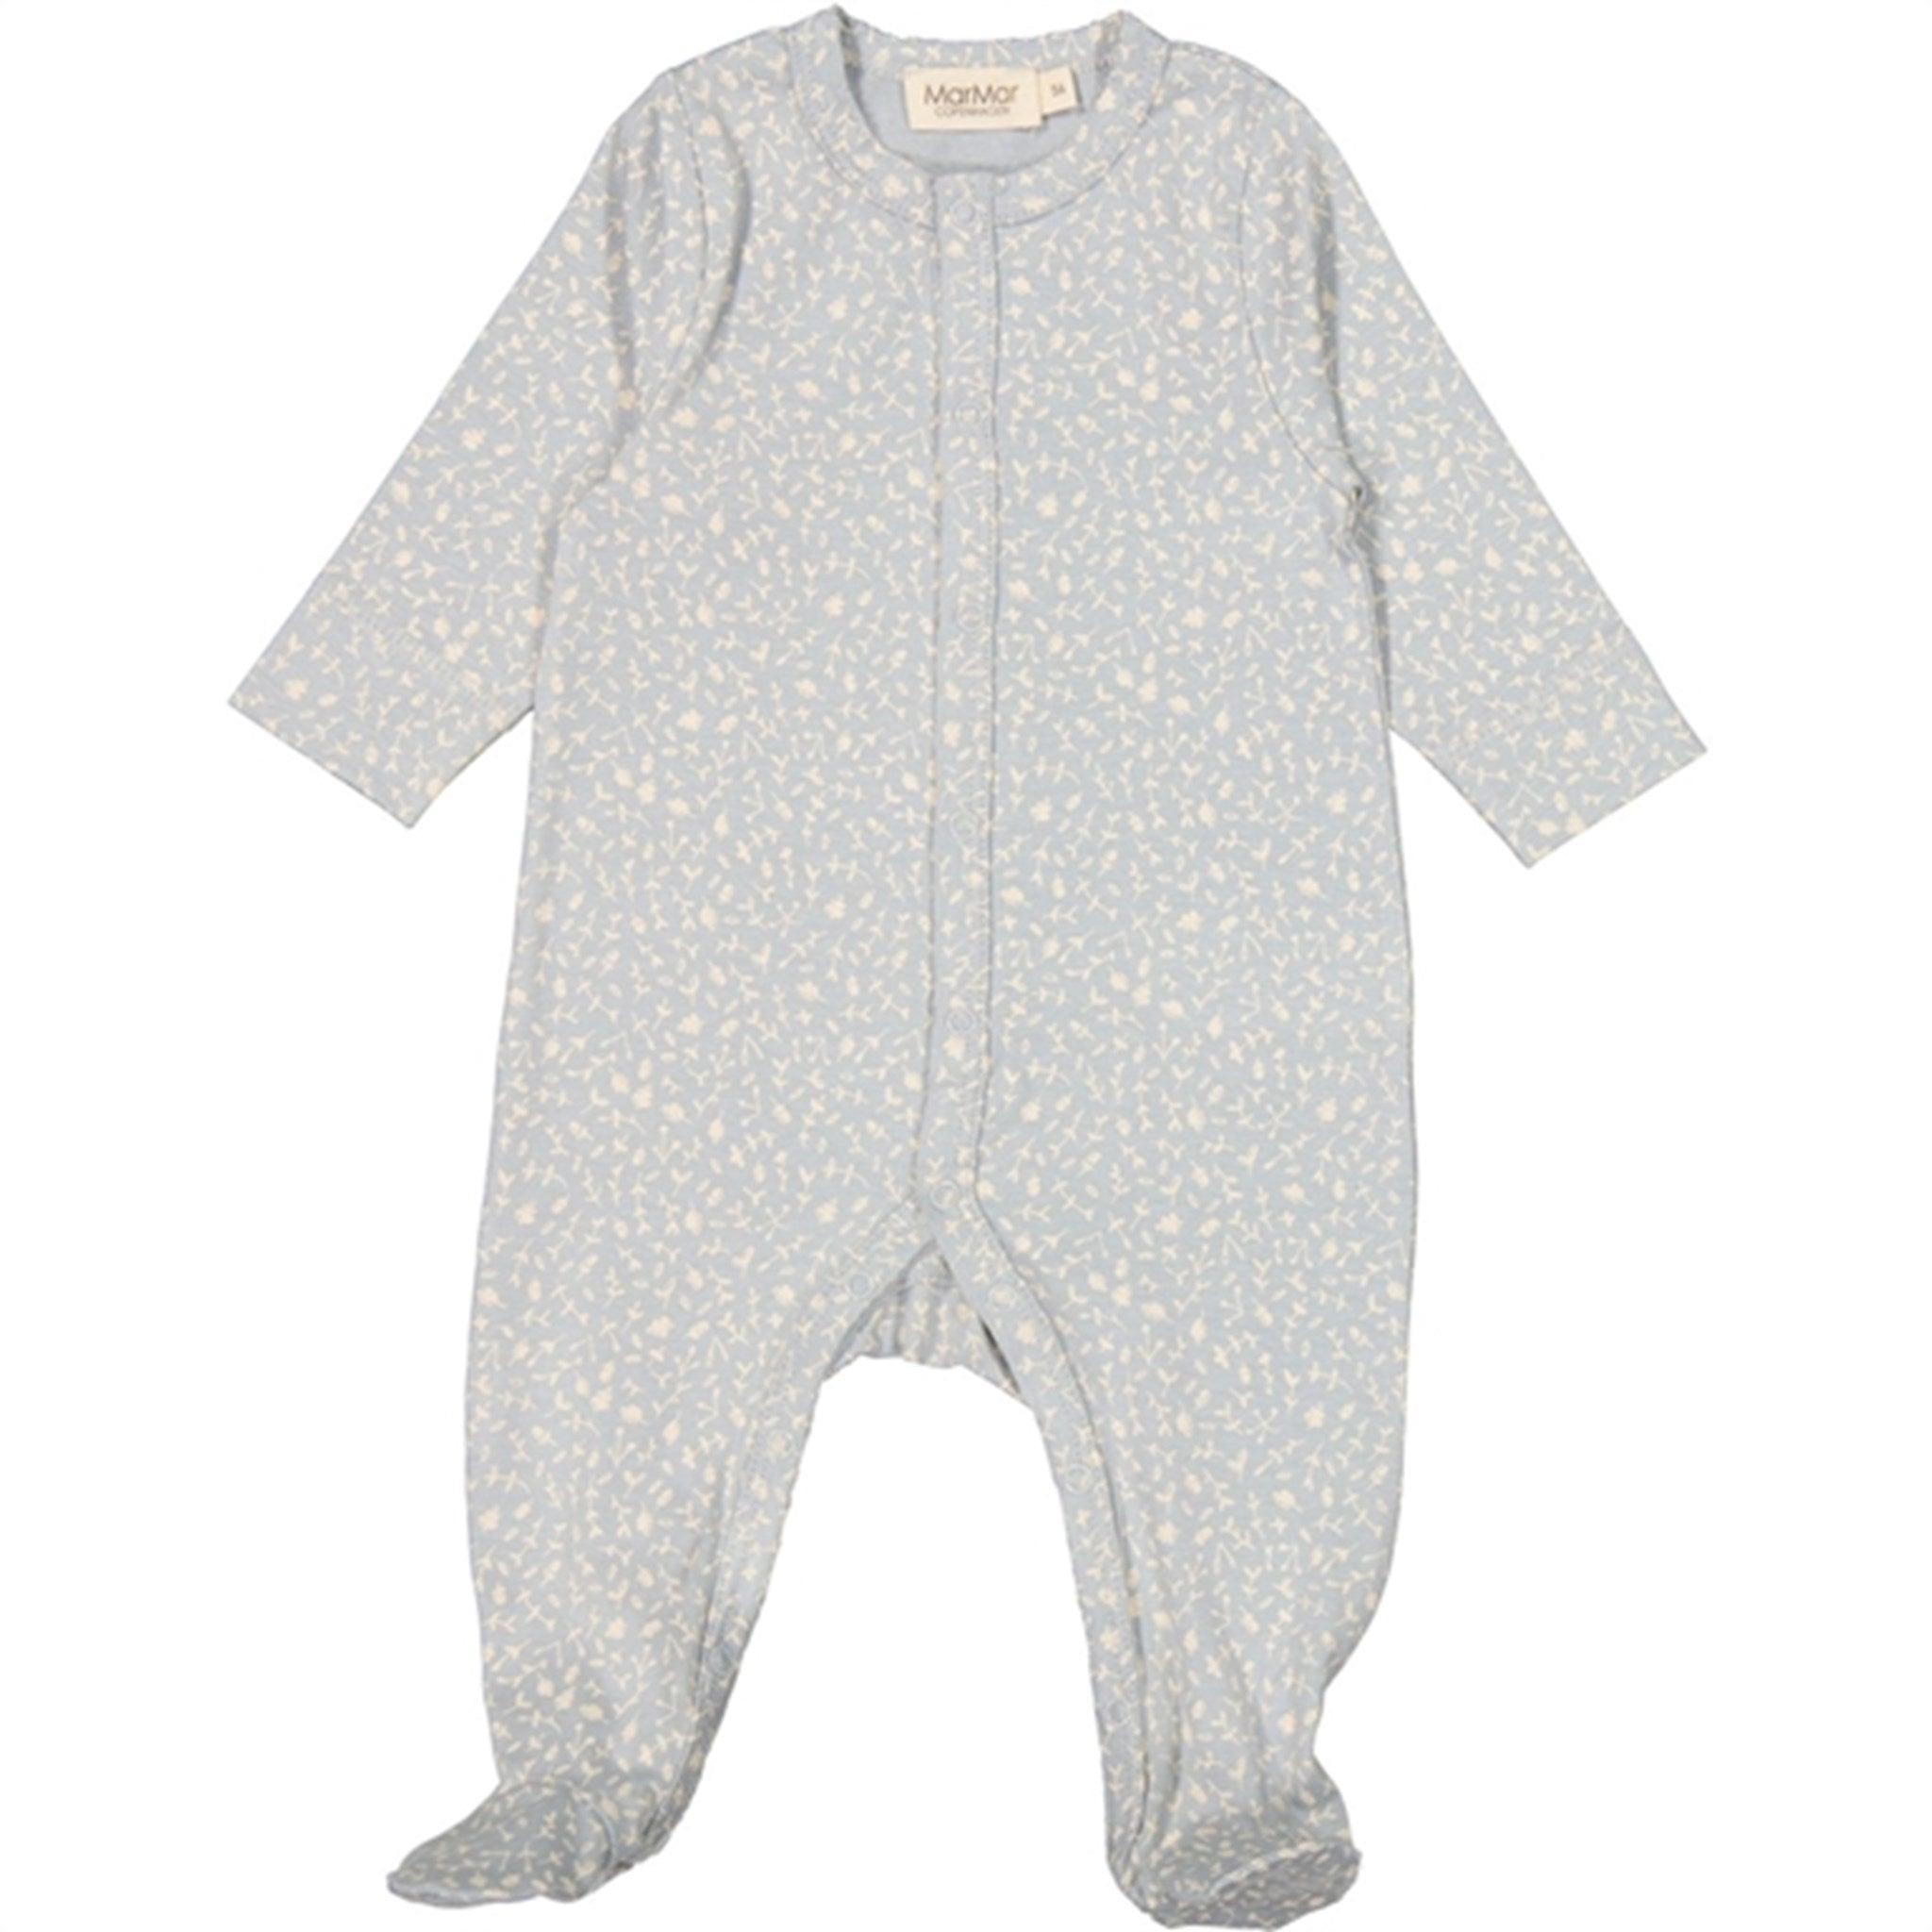 MarMar New Born Meadow Leaves Rukano Suit